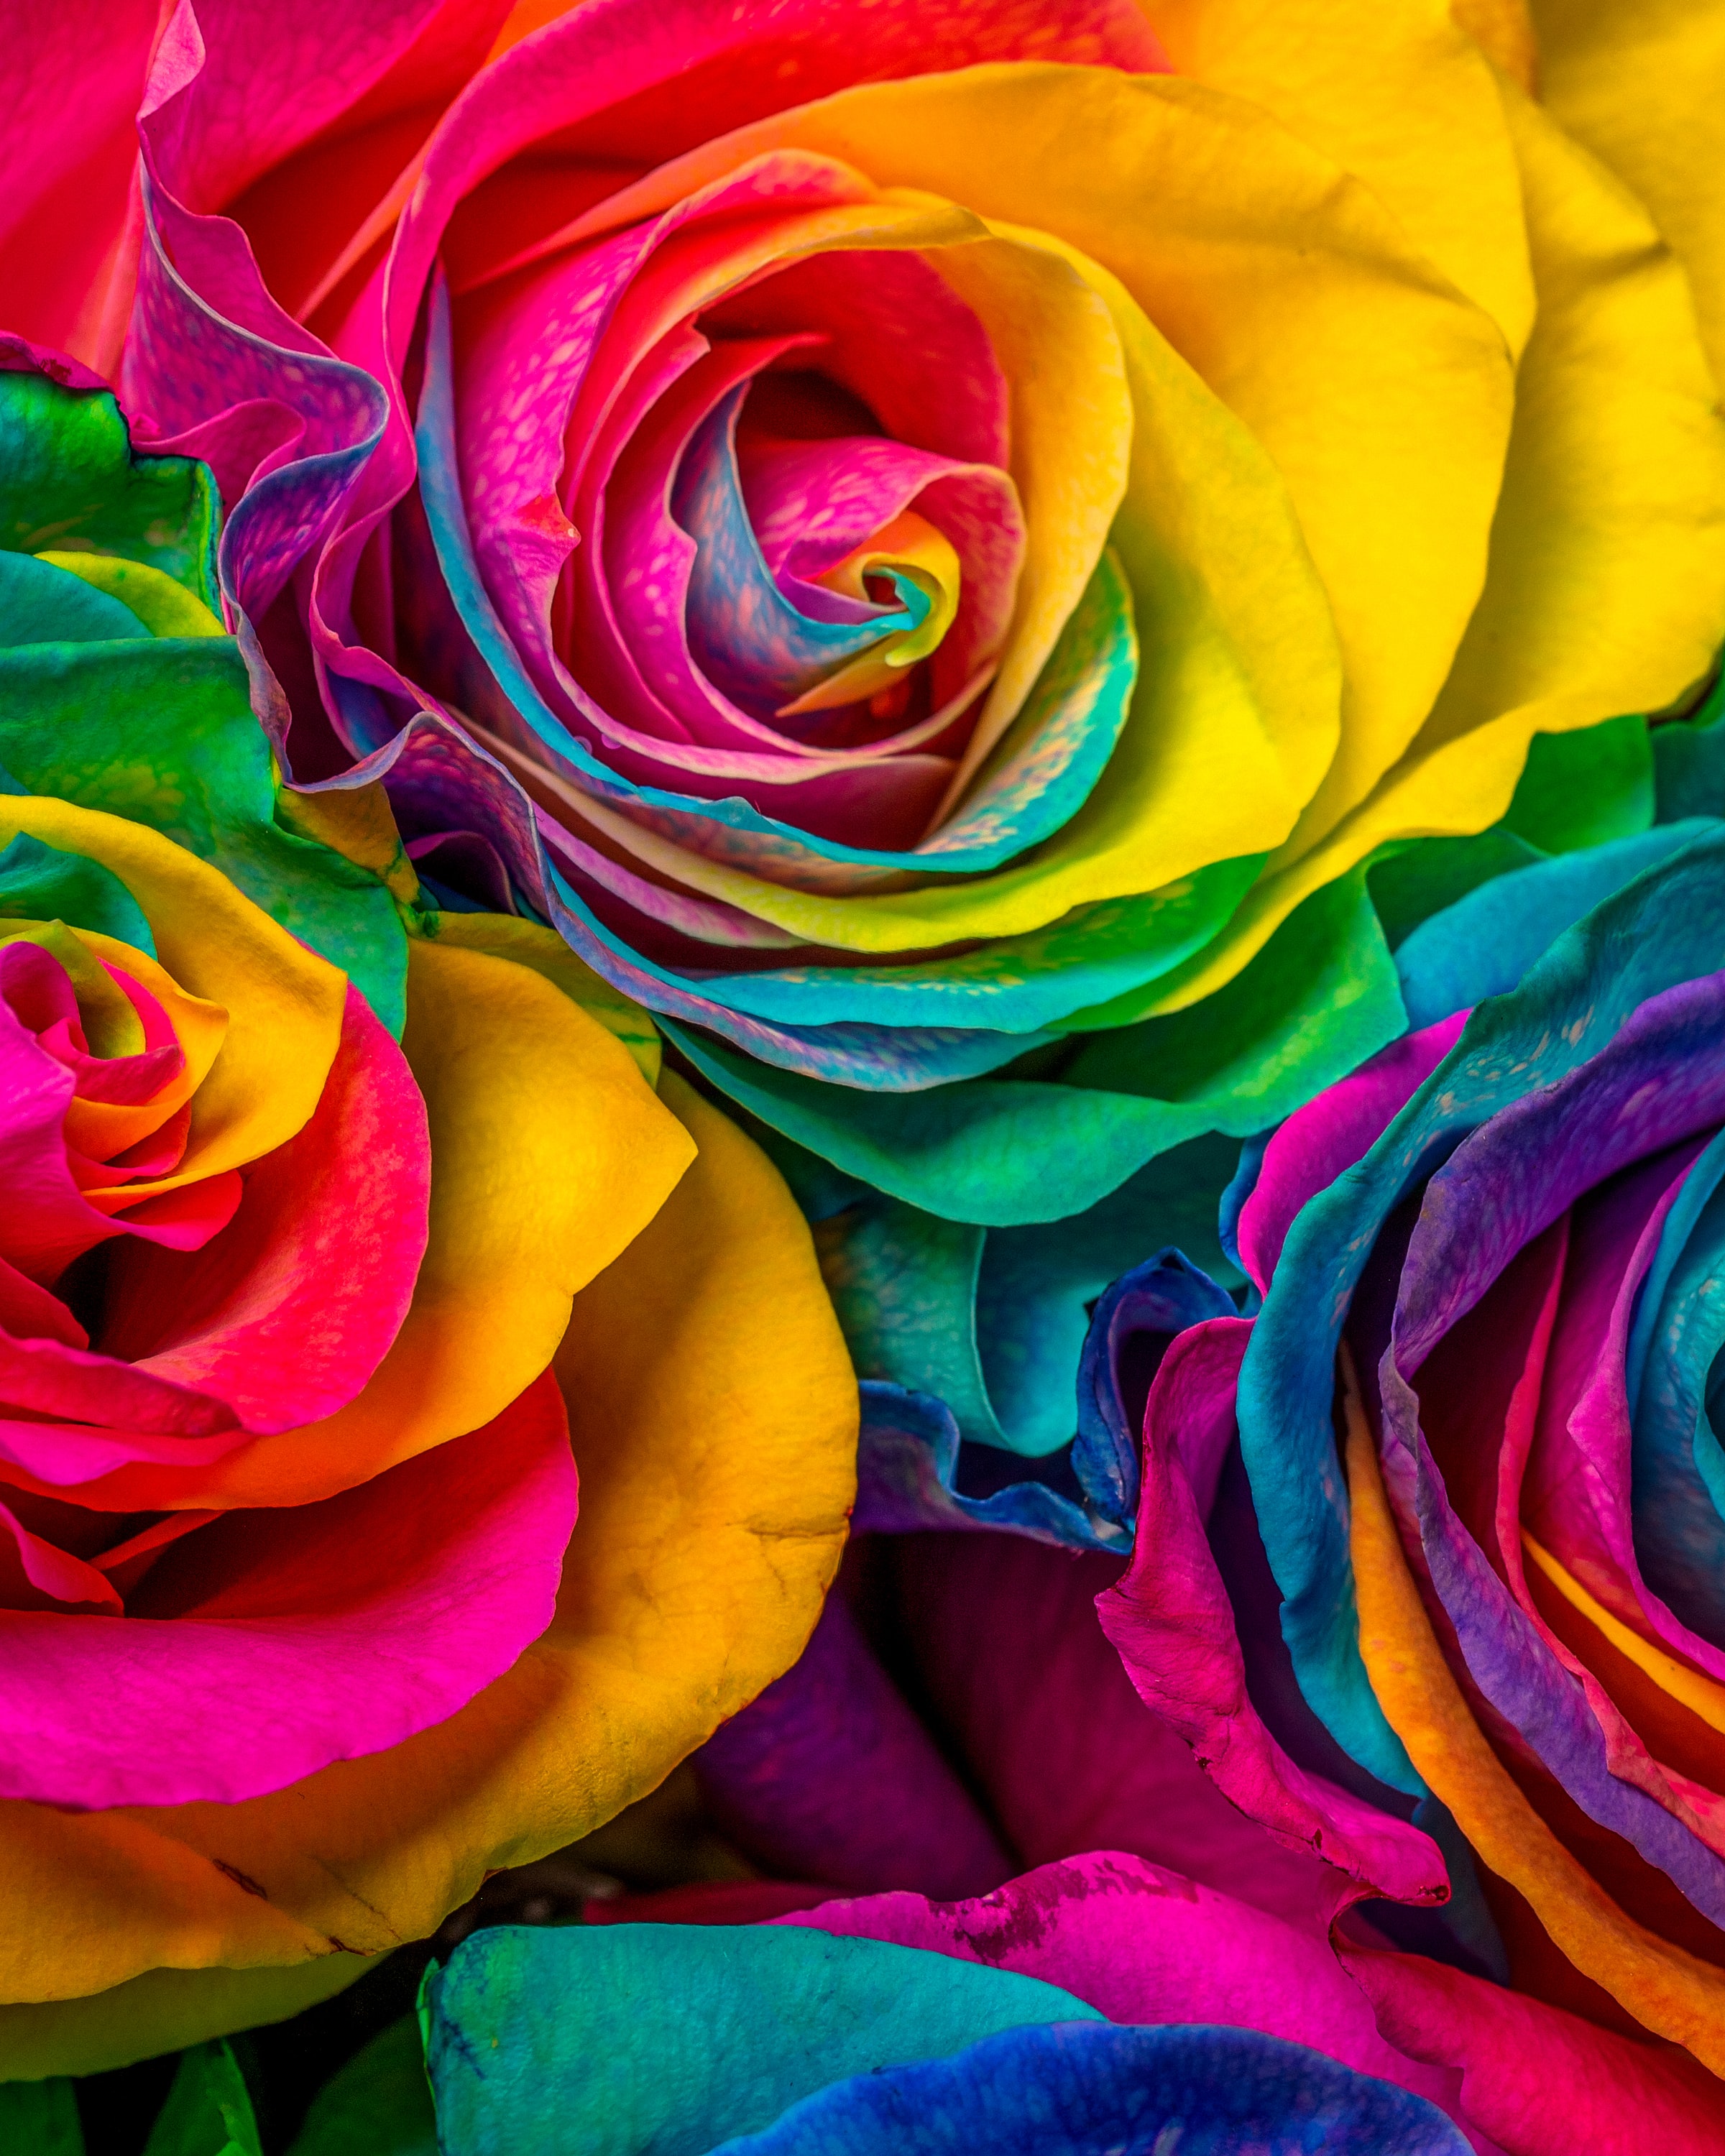 96565 download wallpaper petals, flowers, multicolored, motley, rose flower, rose screensavers and pictures for free